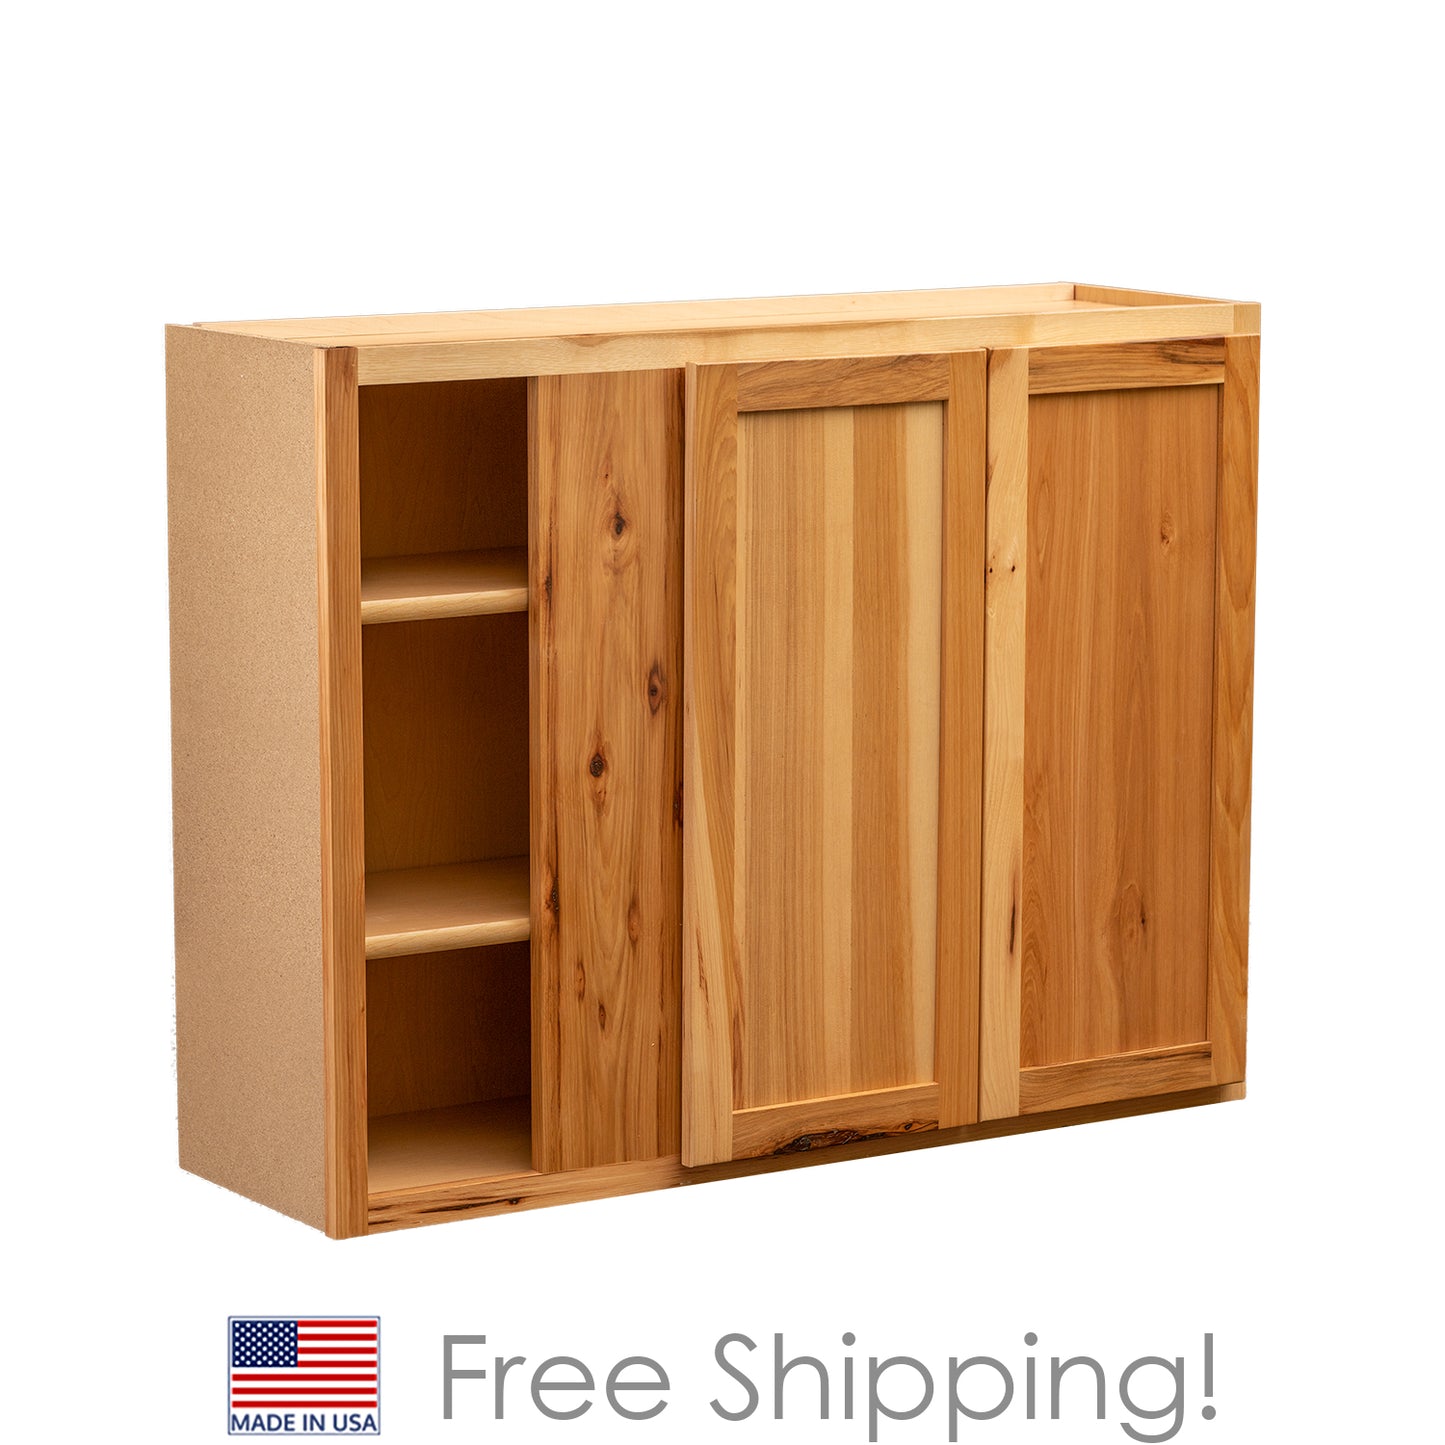 Quicklock RTA (Ready-to-Assemble) Rustic Hickory 42"Wx42"Hx12"D Blind Corner Wall Cabinet